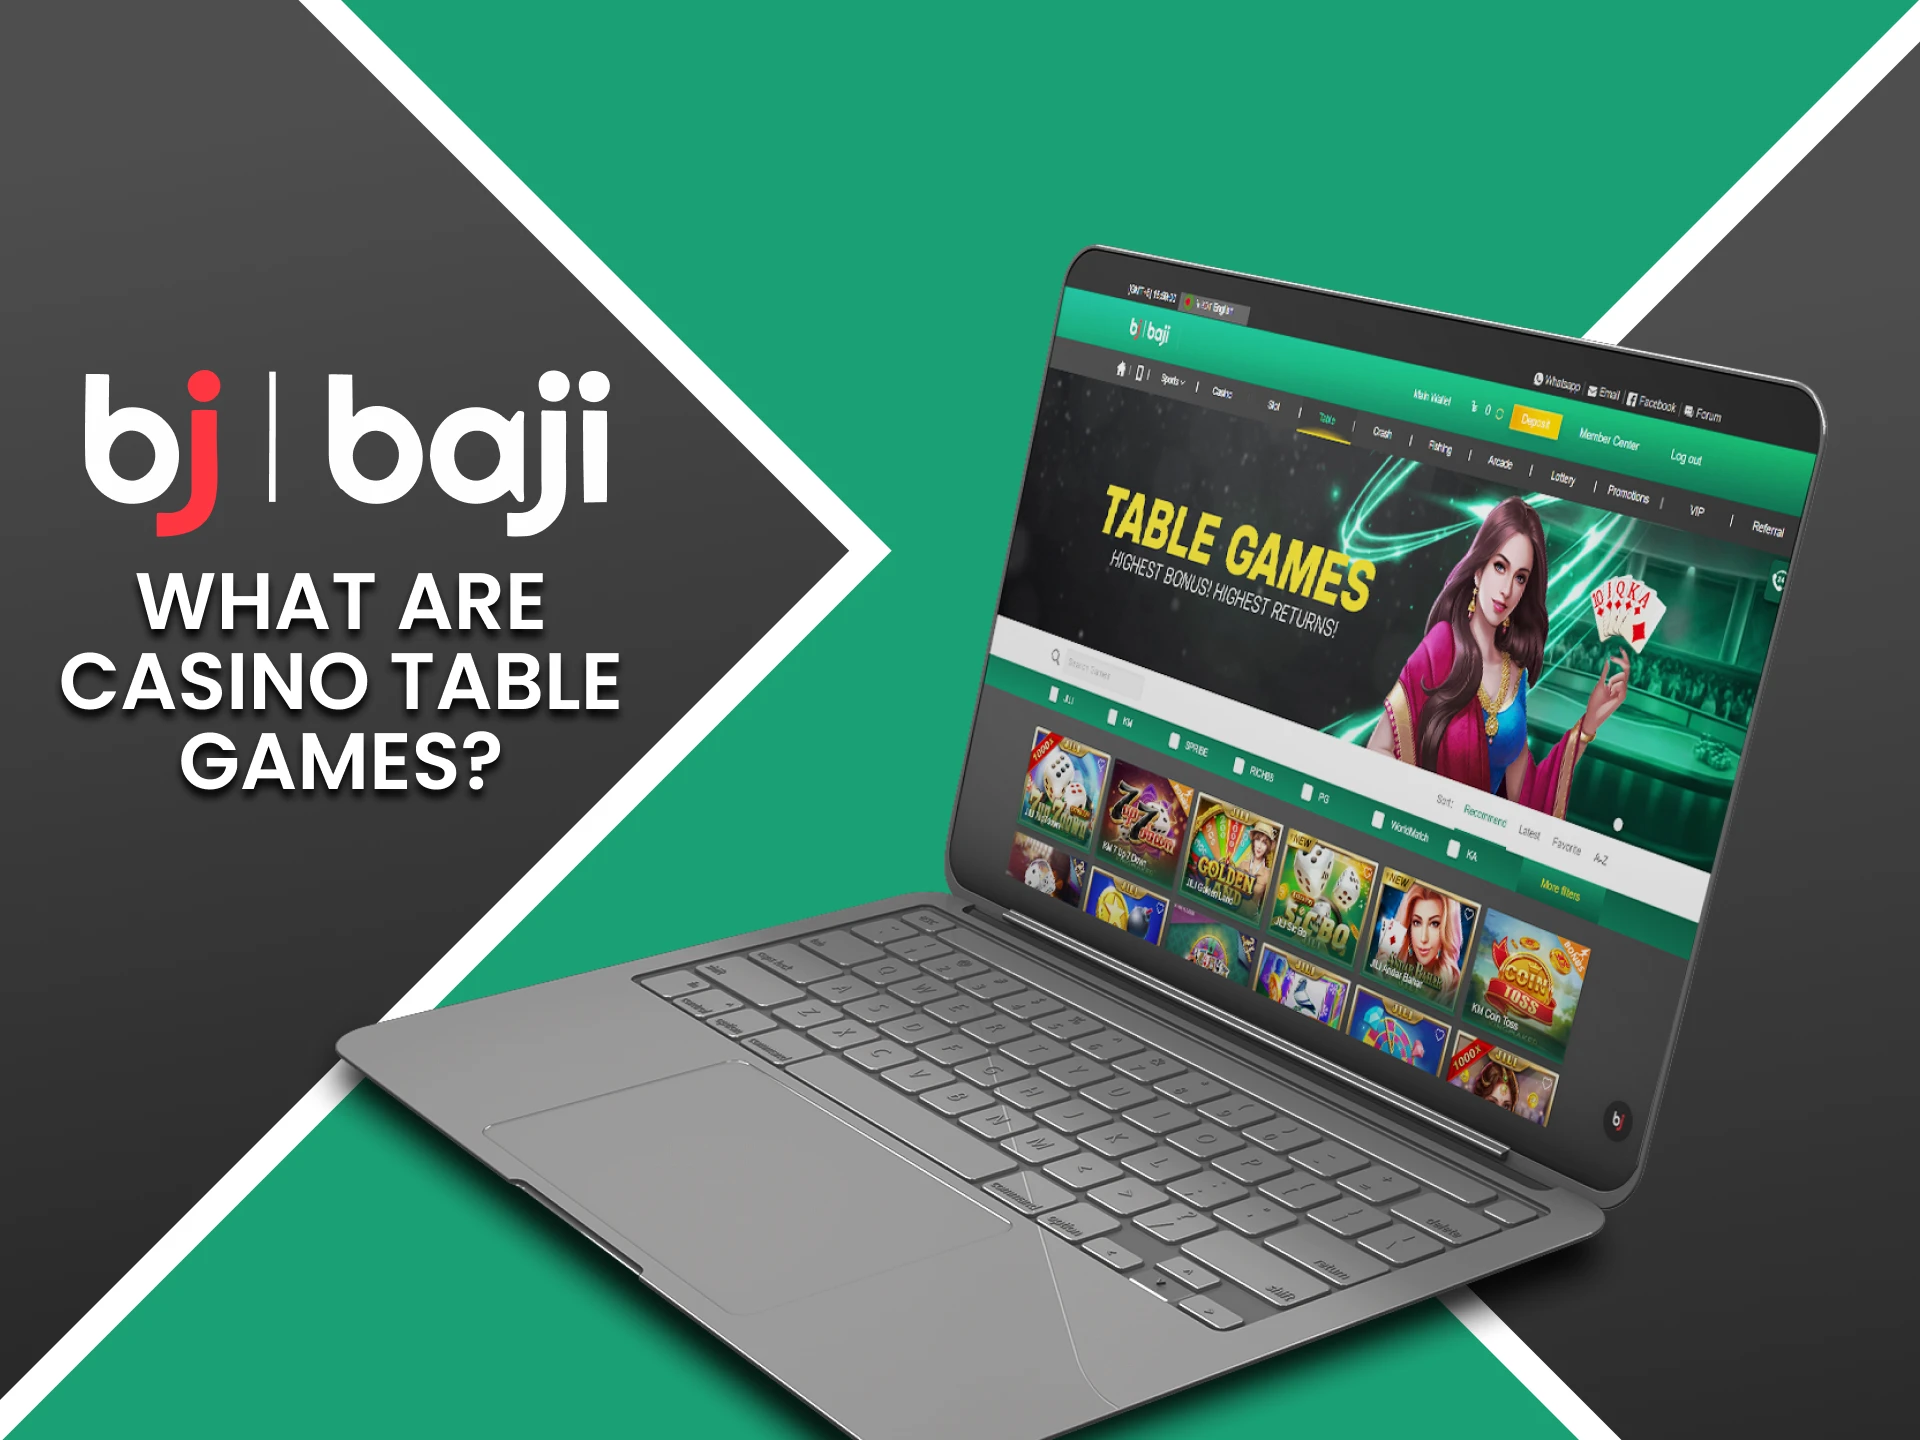 We will tell you everything about table games on Baji.